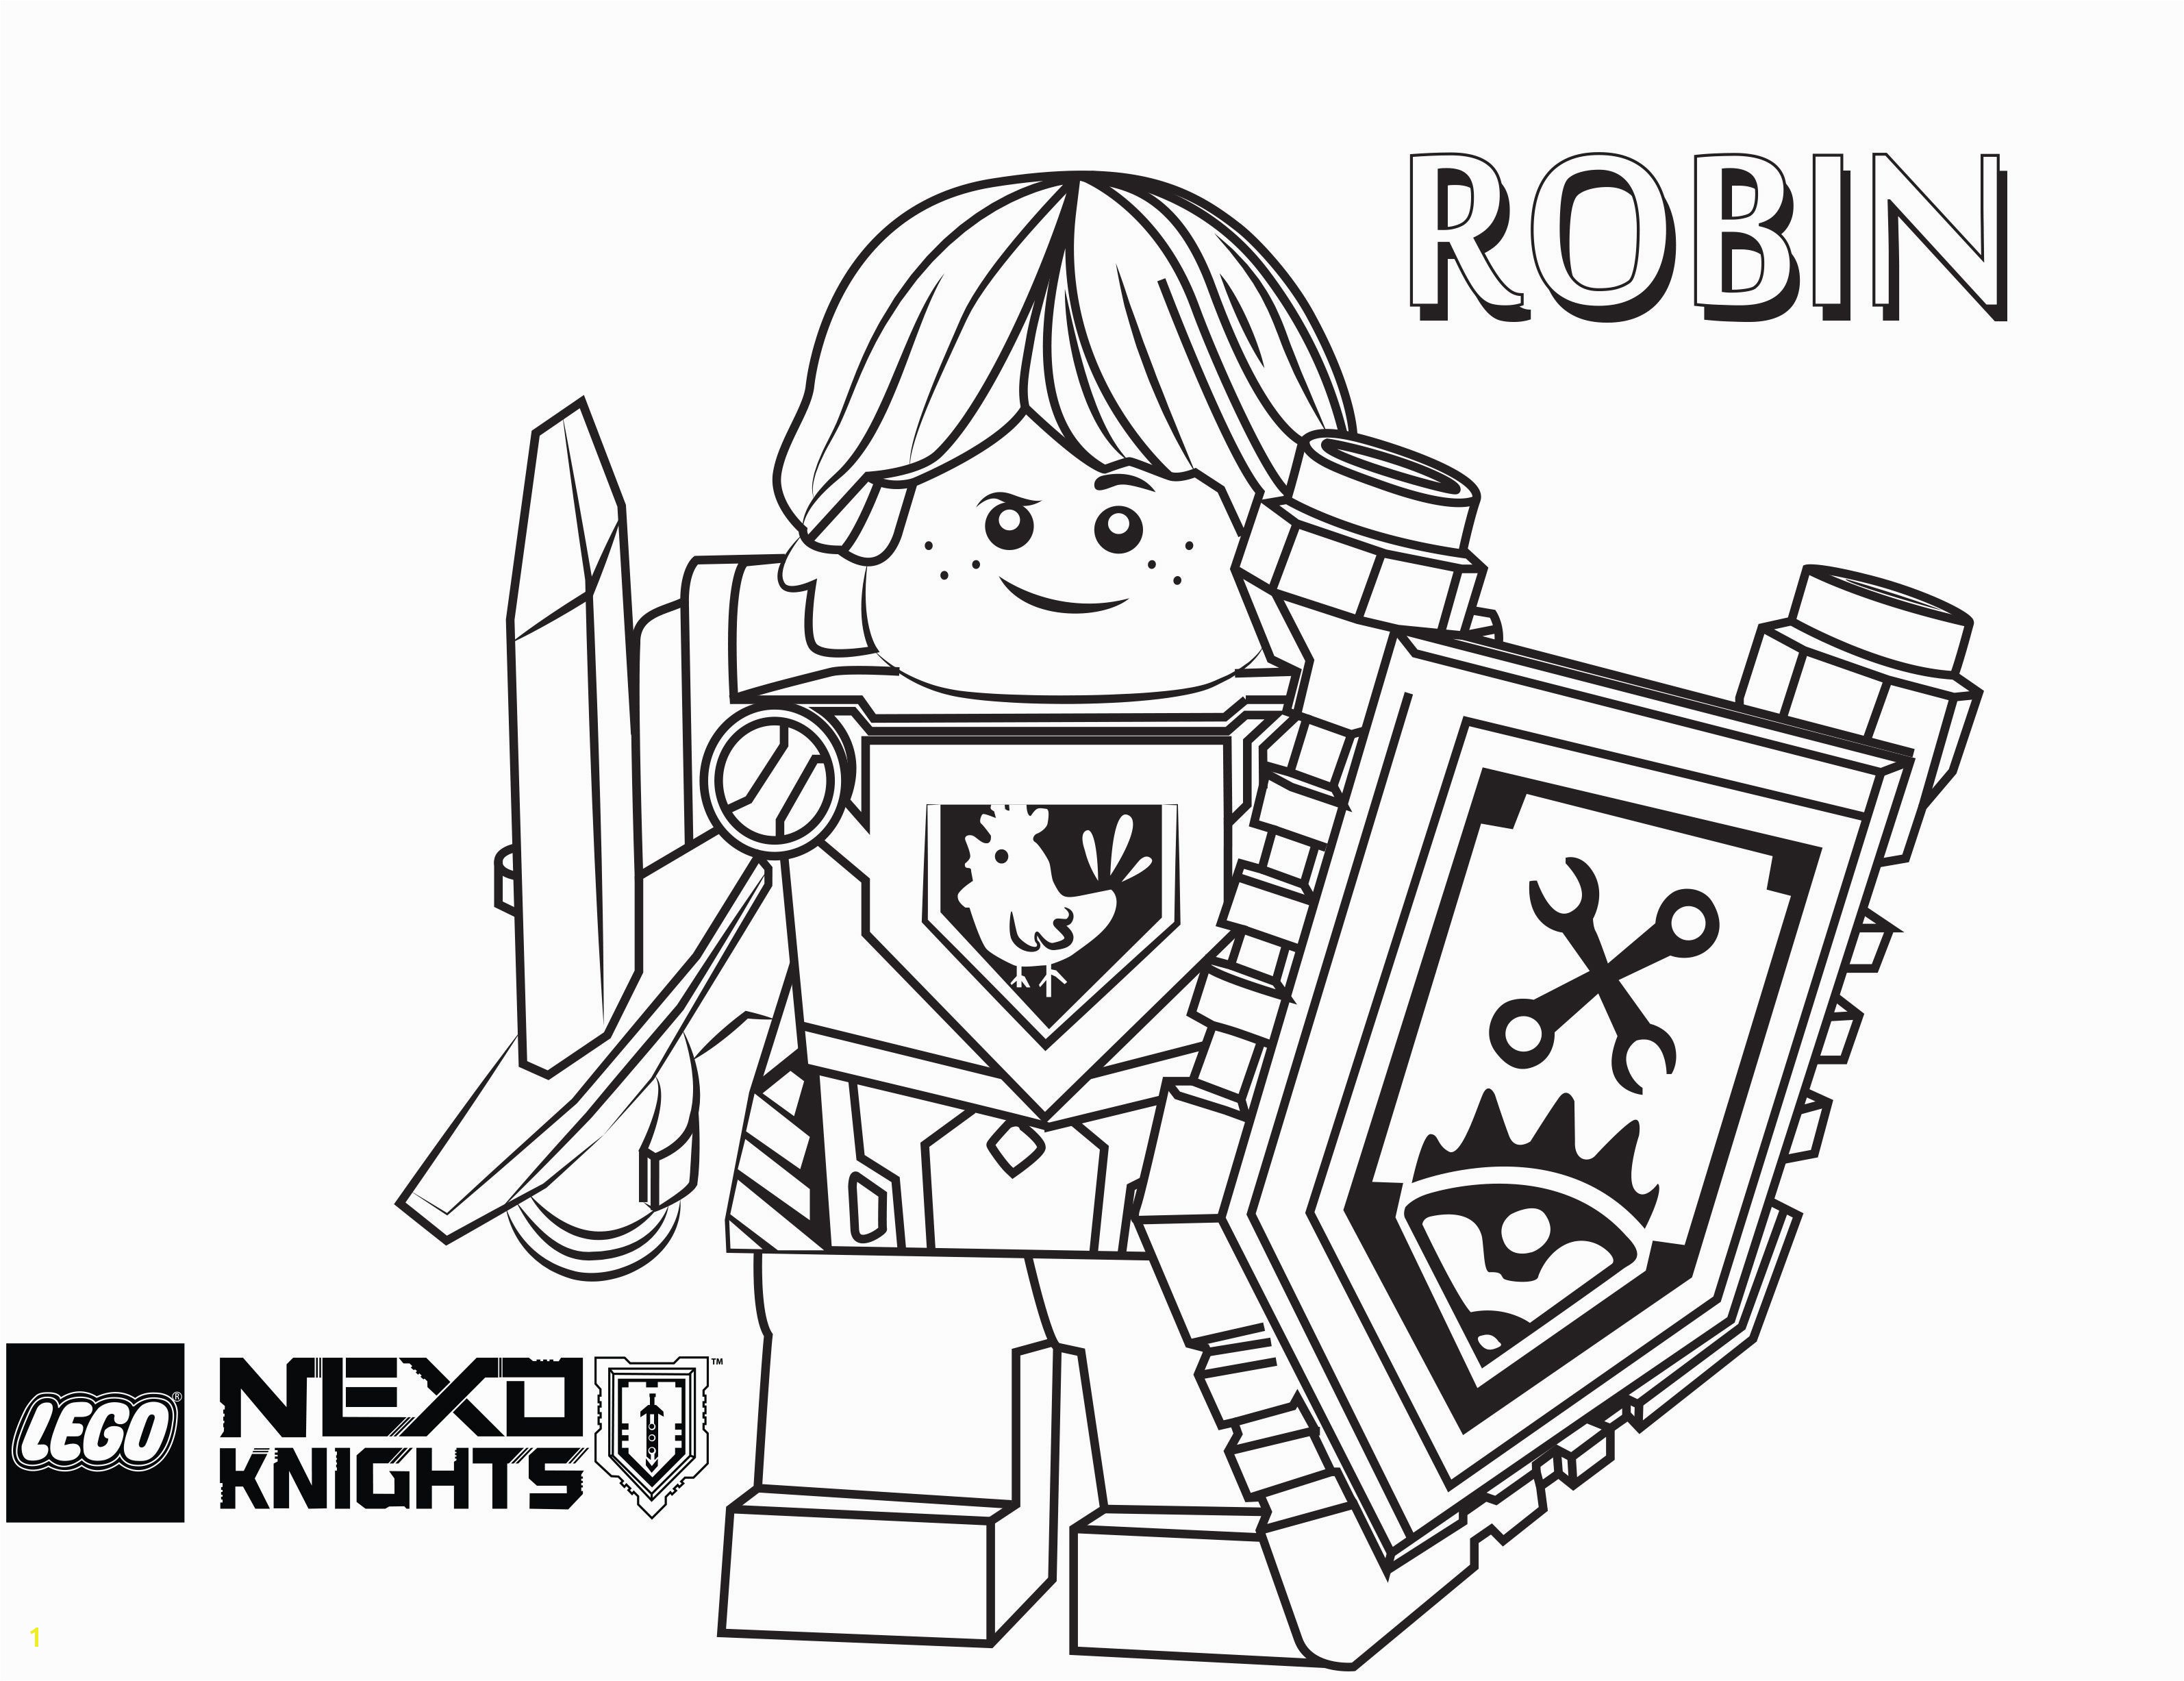 Lego Nexo Knights Coloring Pages to Print Lego Nexo Knights Coloring Pages Free Printable Lego Nexo Knights